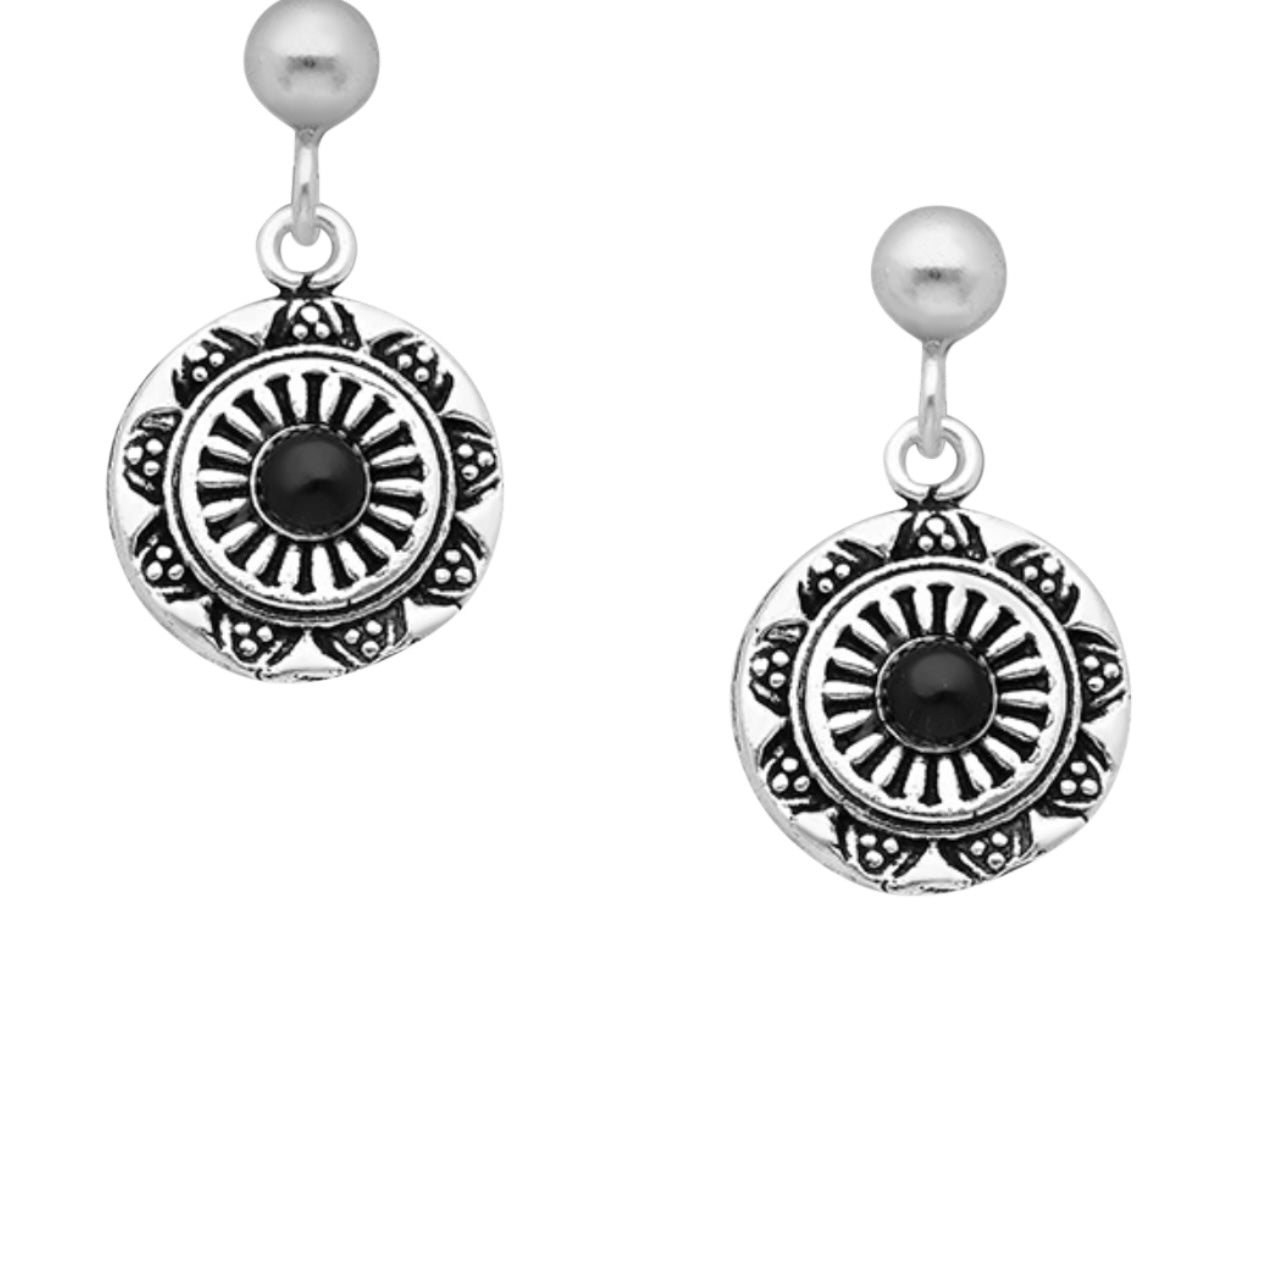 Sterling Silver Hoop or Stud Earrings, with decorative circle disc drop with stone centre   Comes in Turquoise or Black 